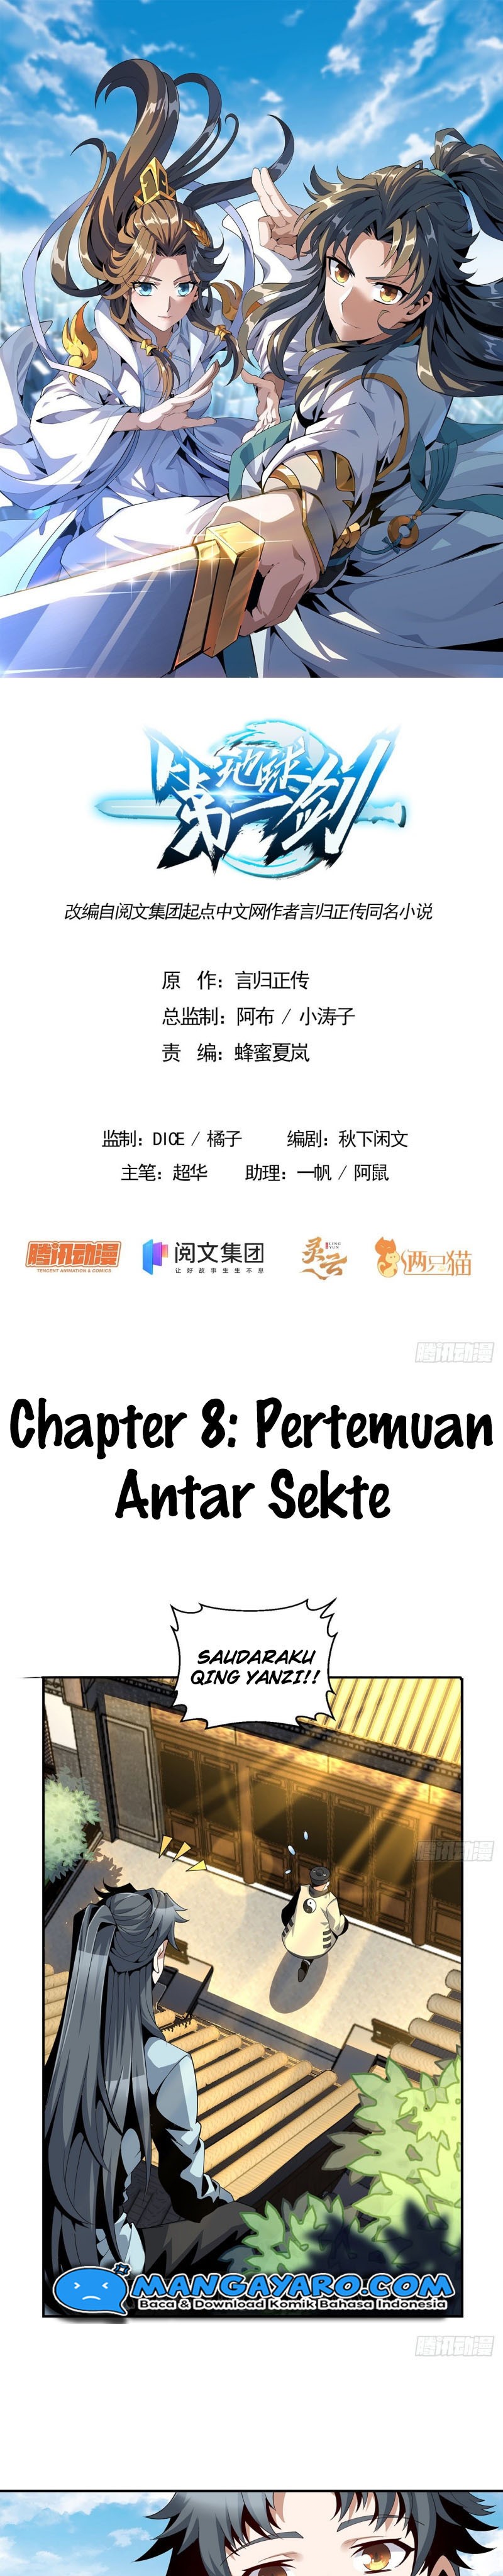 The First Sword of Earth Chapter 08